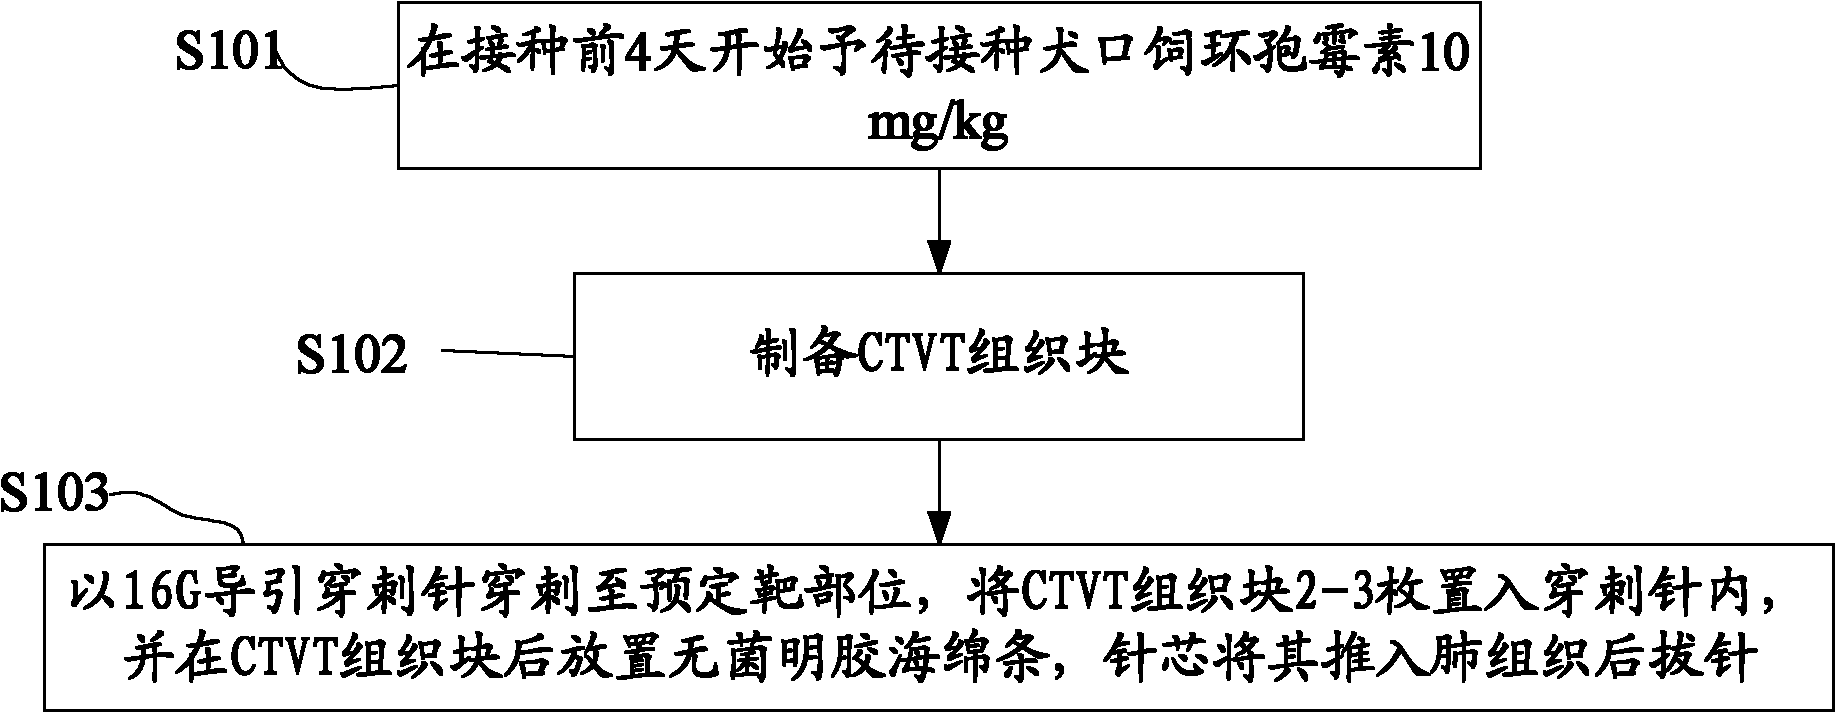 Method for constructing lung tumor experimental animal model